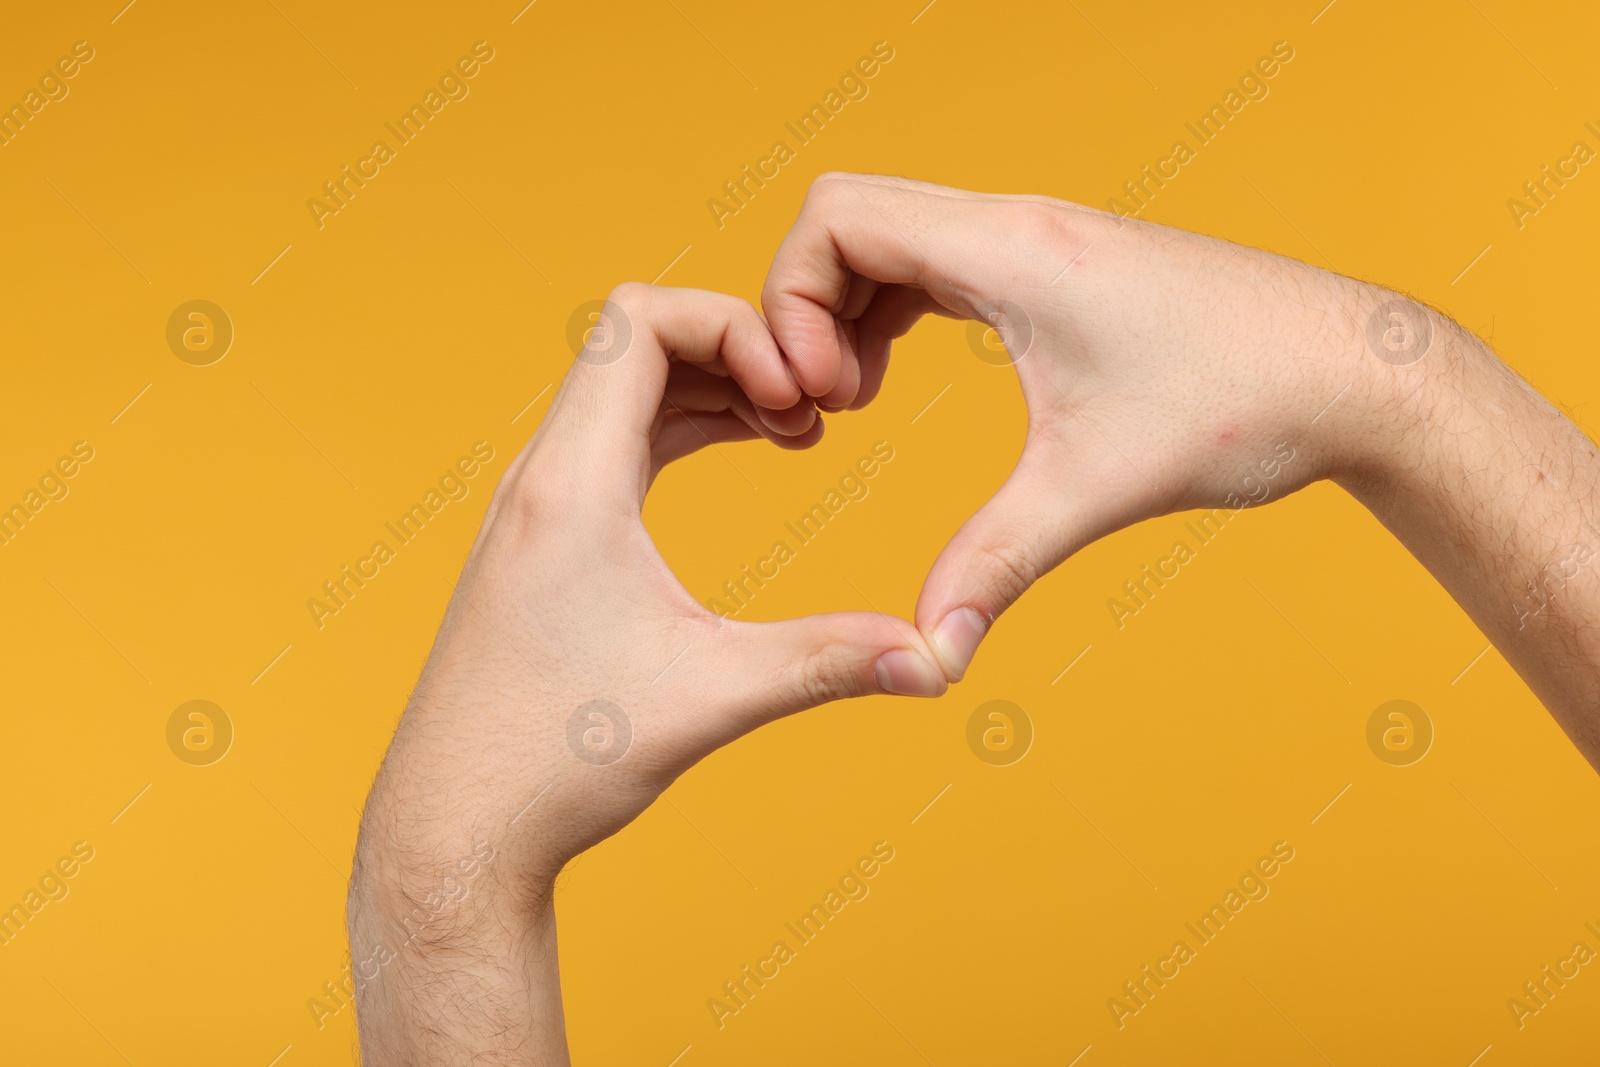 Photo of Man showing heart gesture with hands on golden background, closeup